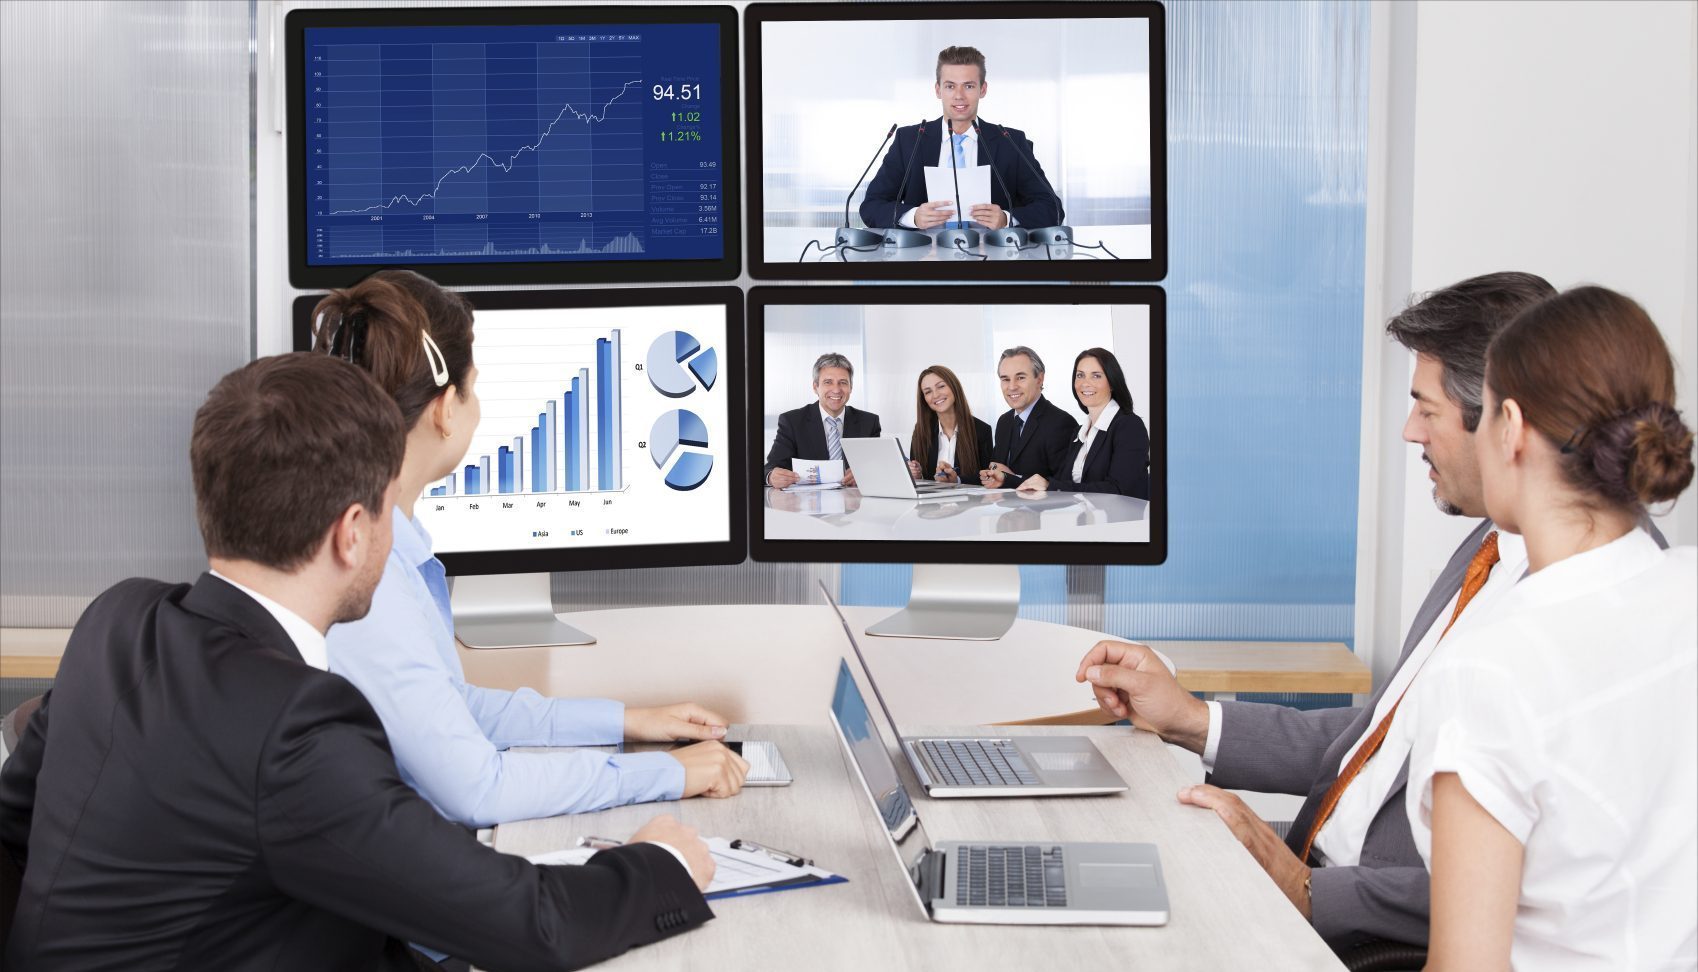 Creative Ways to Use Video Conferencing as an Interpreting Tool